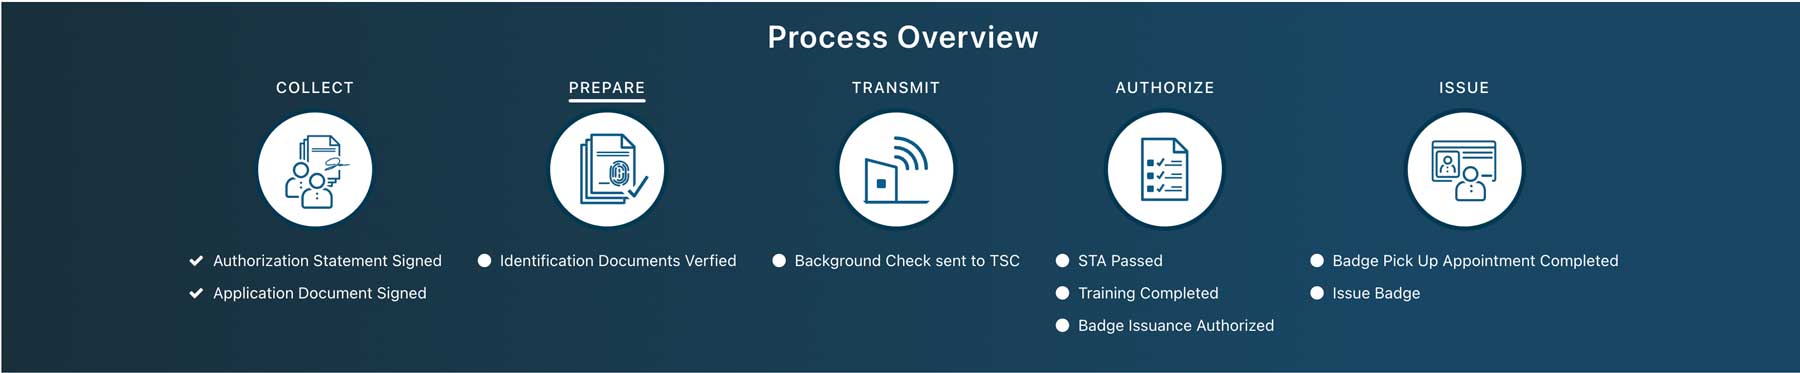 process overview